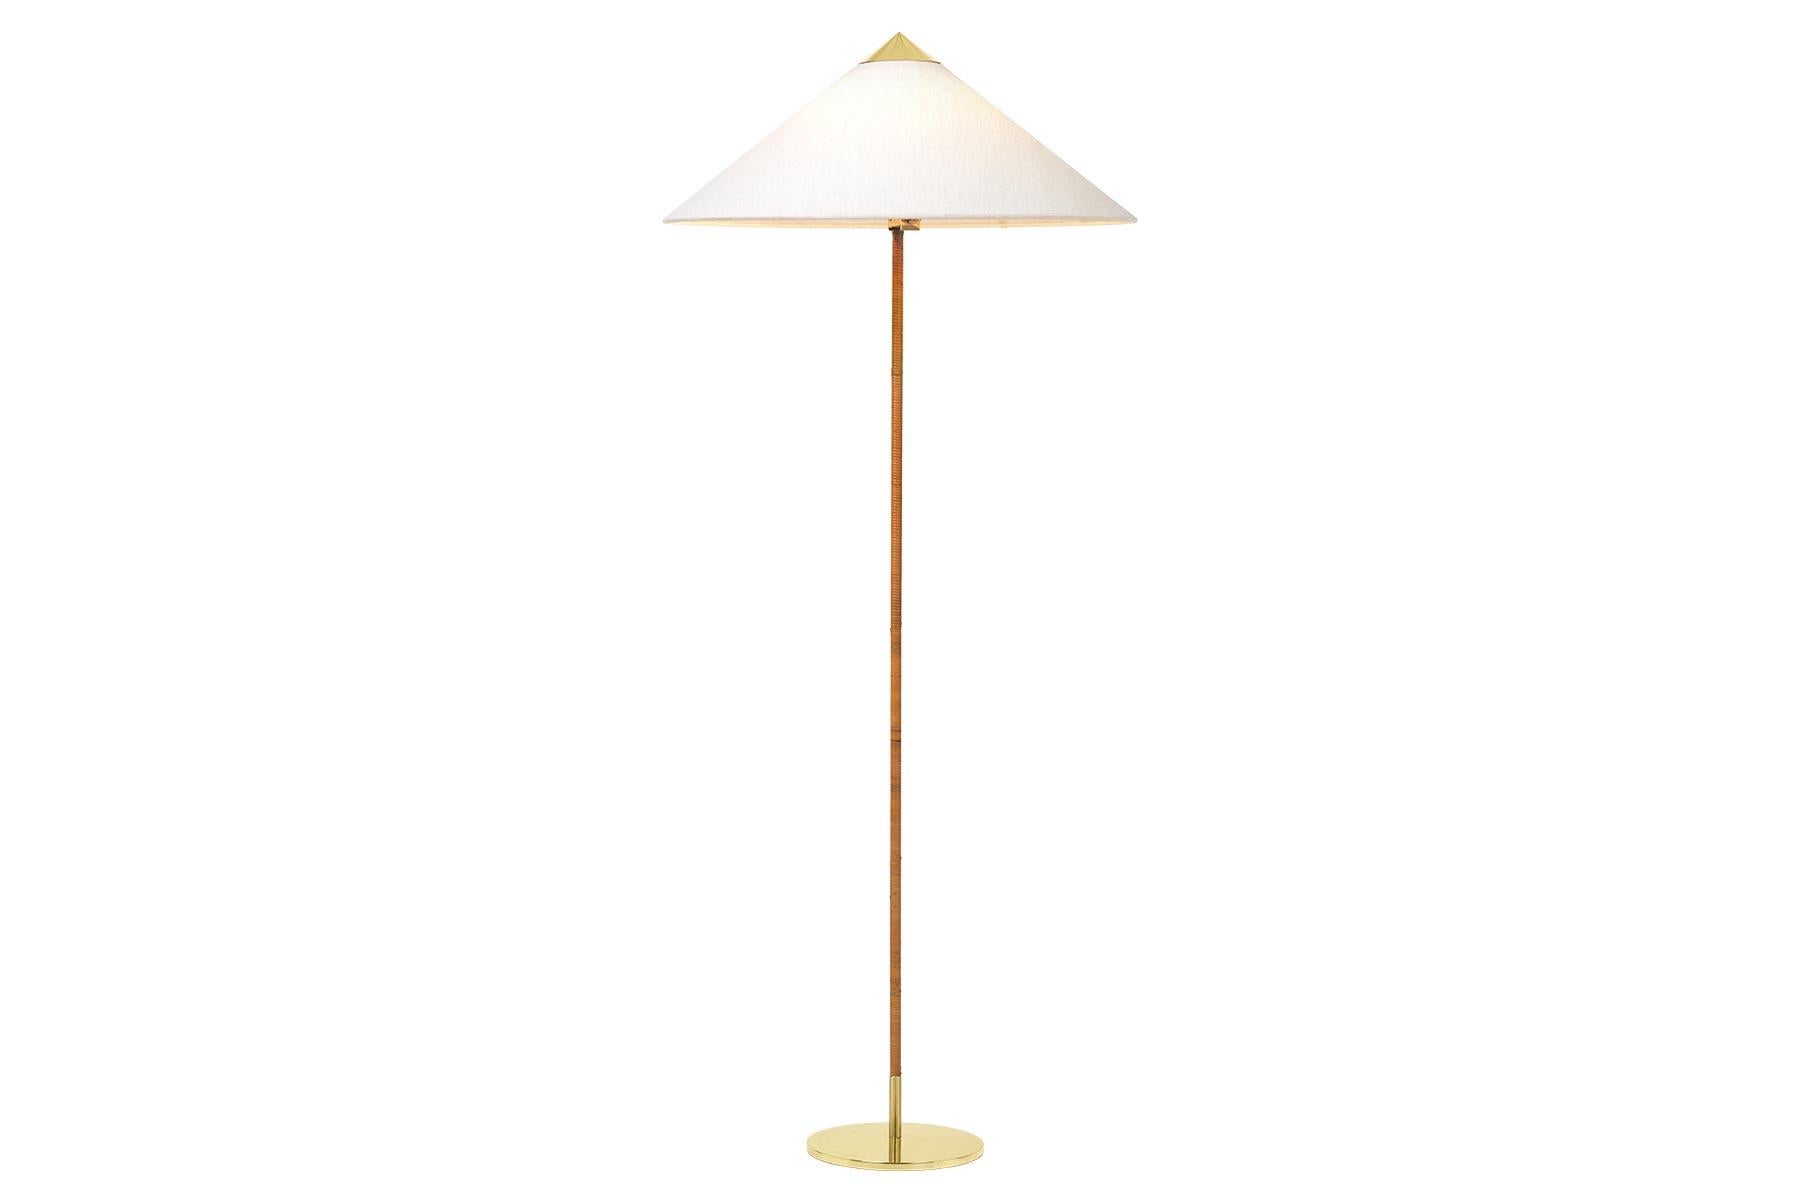 The 9602 floor lamp, also known as “Chinese Hat” was designed by Paavo Tynell in 1935 for the Hotel Aulanko. Characterised by its elegant and airy lampshade and rattan-covered stem, the 9602 Floor Lamp shows the designer’s limitless imagination and